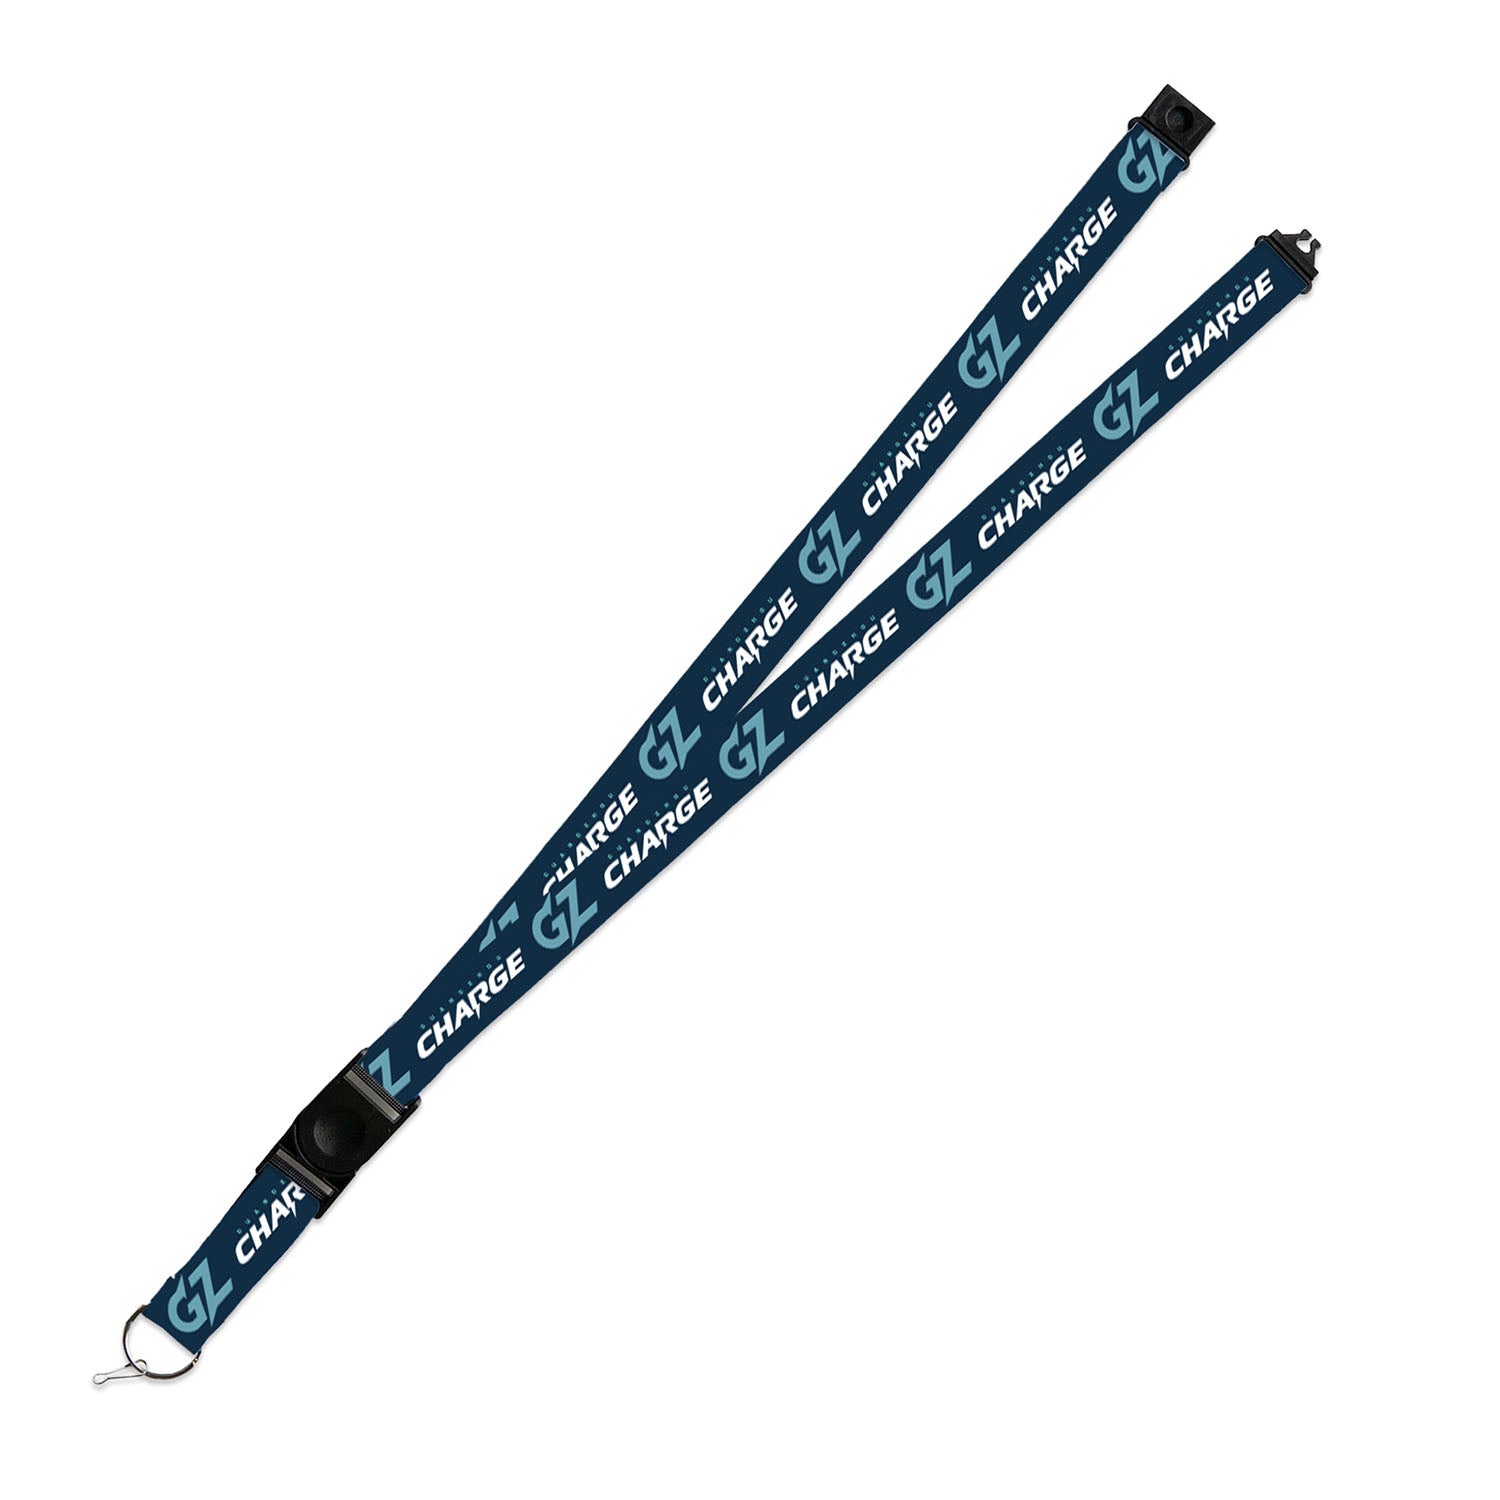 Guangzhou Charge Lanyard in Blue - Front View